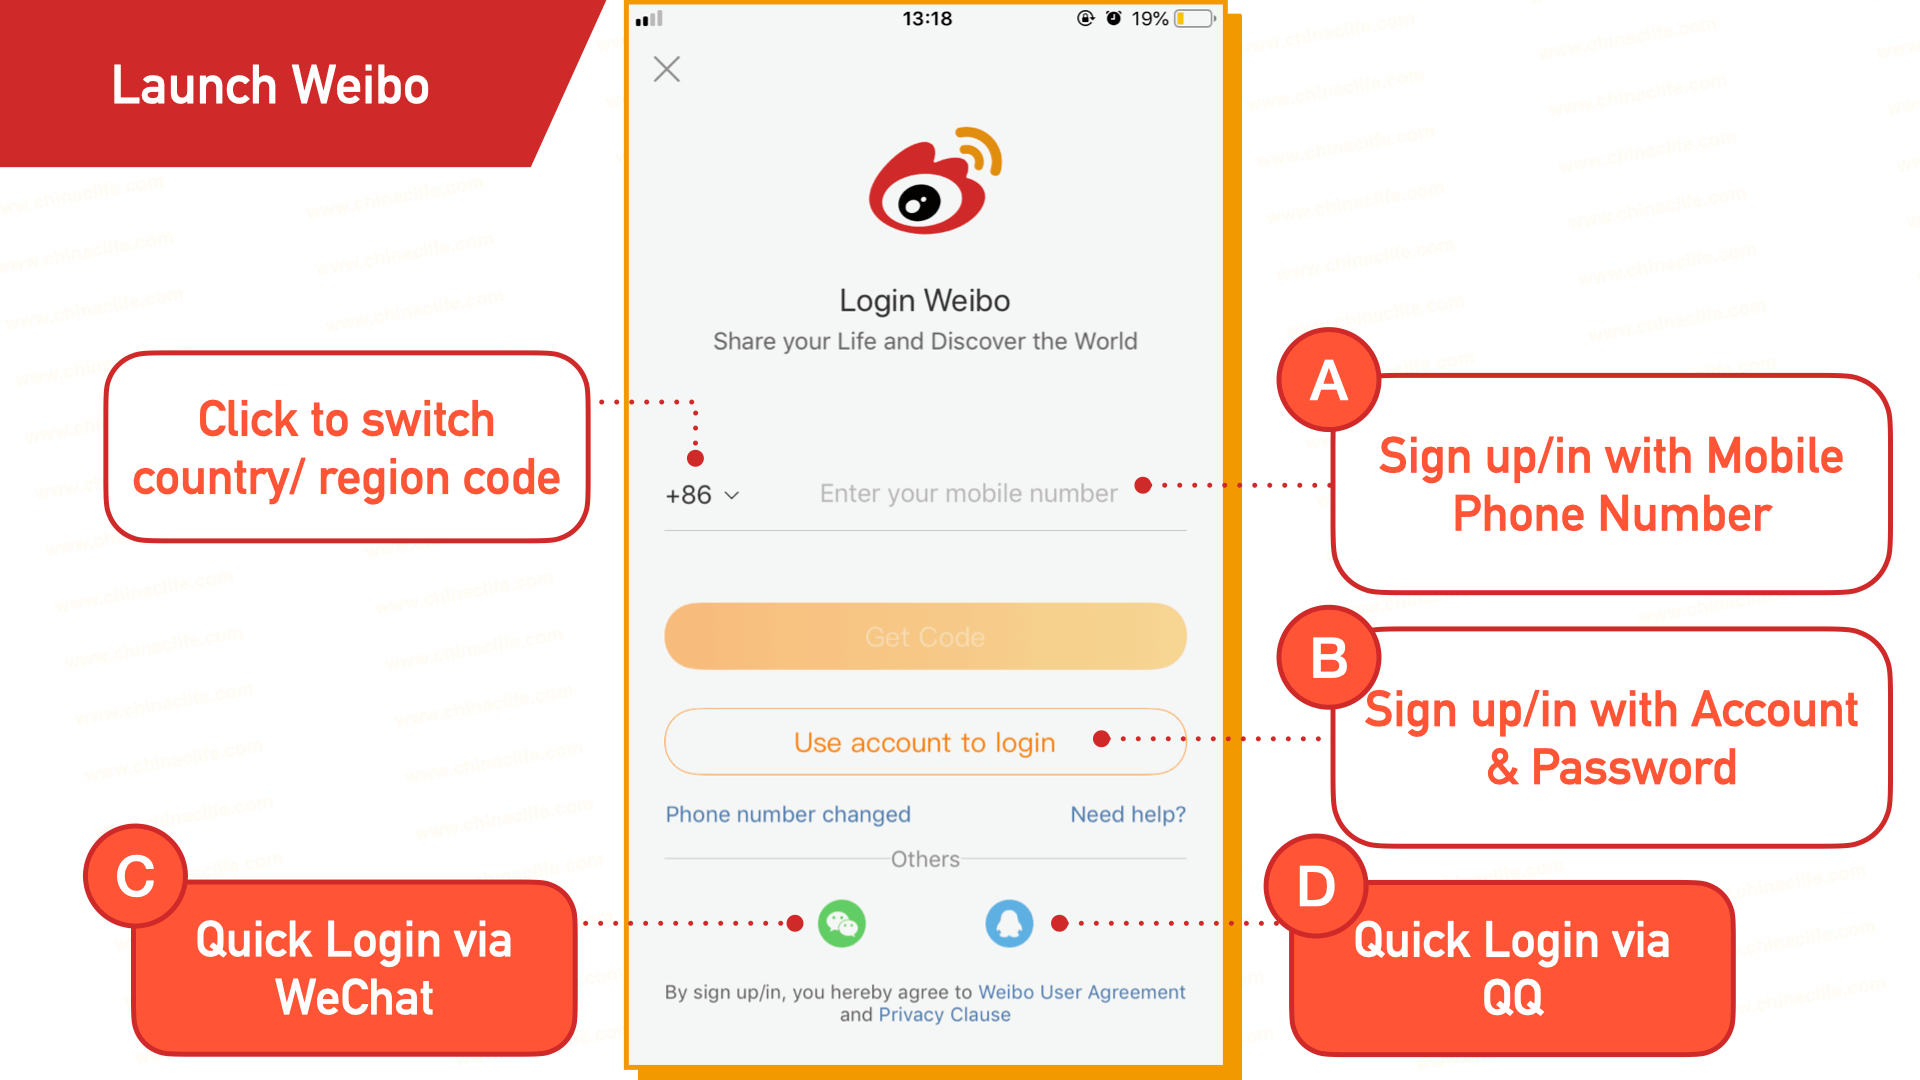 Sina Weibo Sign up with Tencent's WeChat/QQ account